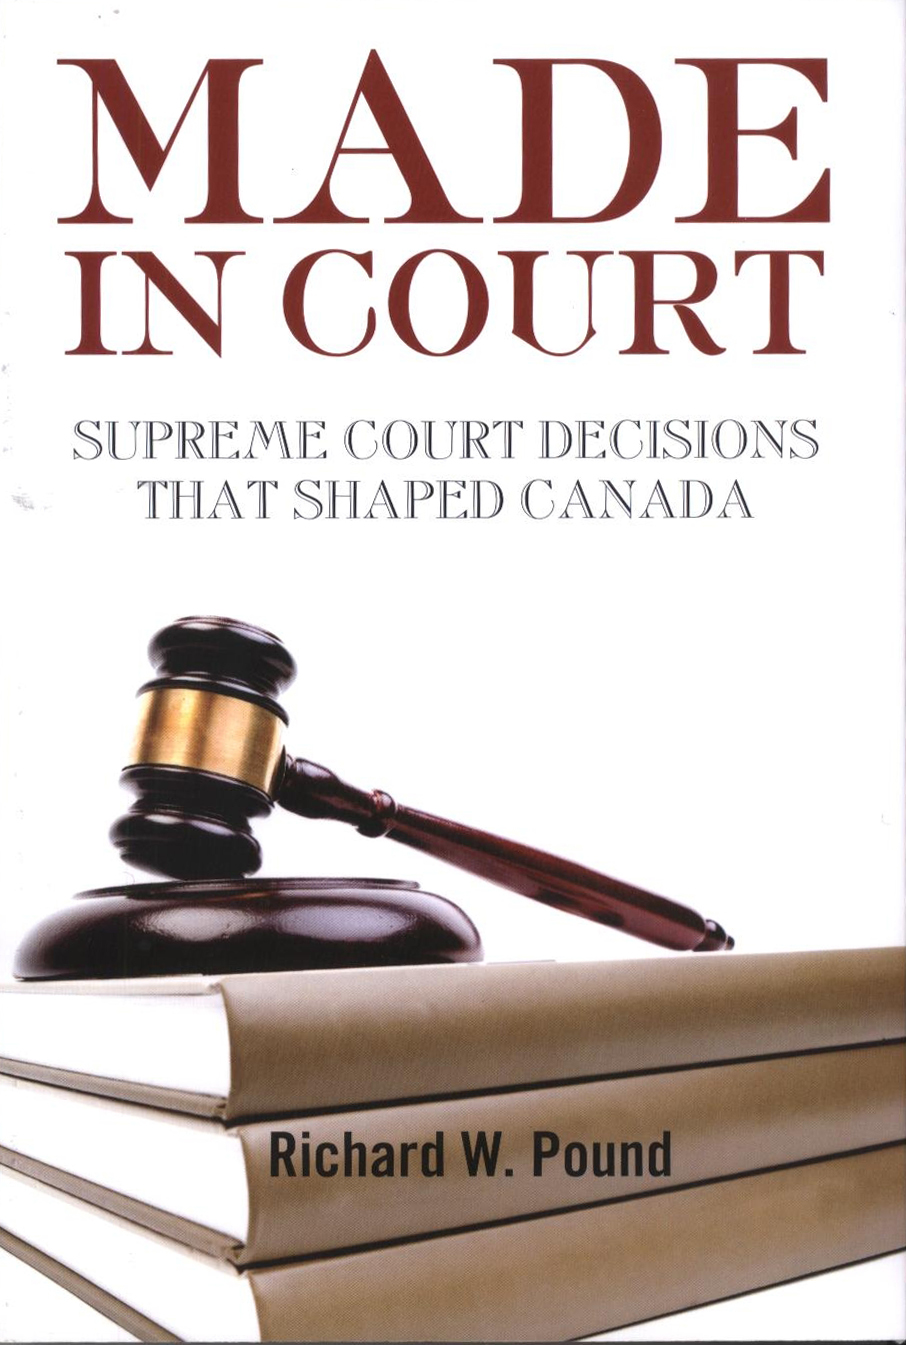 Supreme Court decisions that shaped Canada by Richard W. Pound